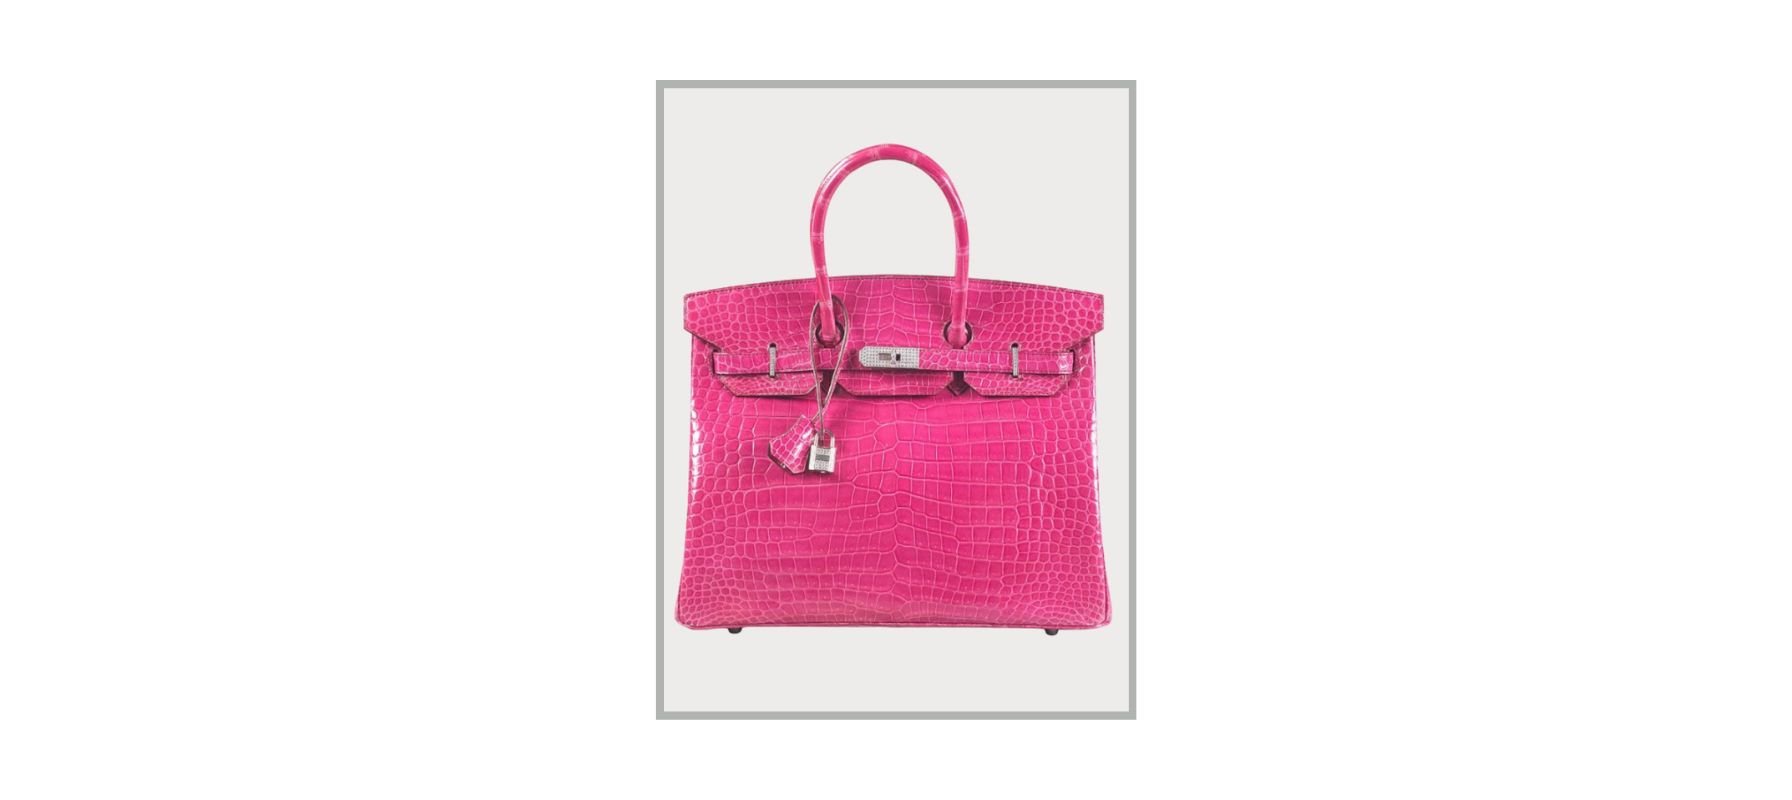 Designer Bags for Women - NET-A-PORTER | Big tote bags, Striped bags, Bags